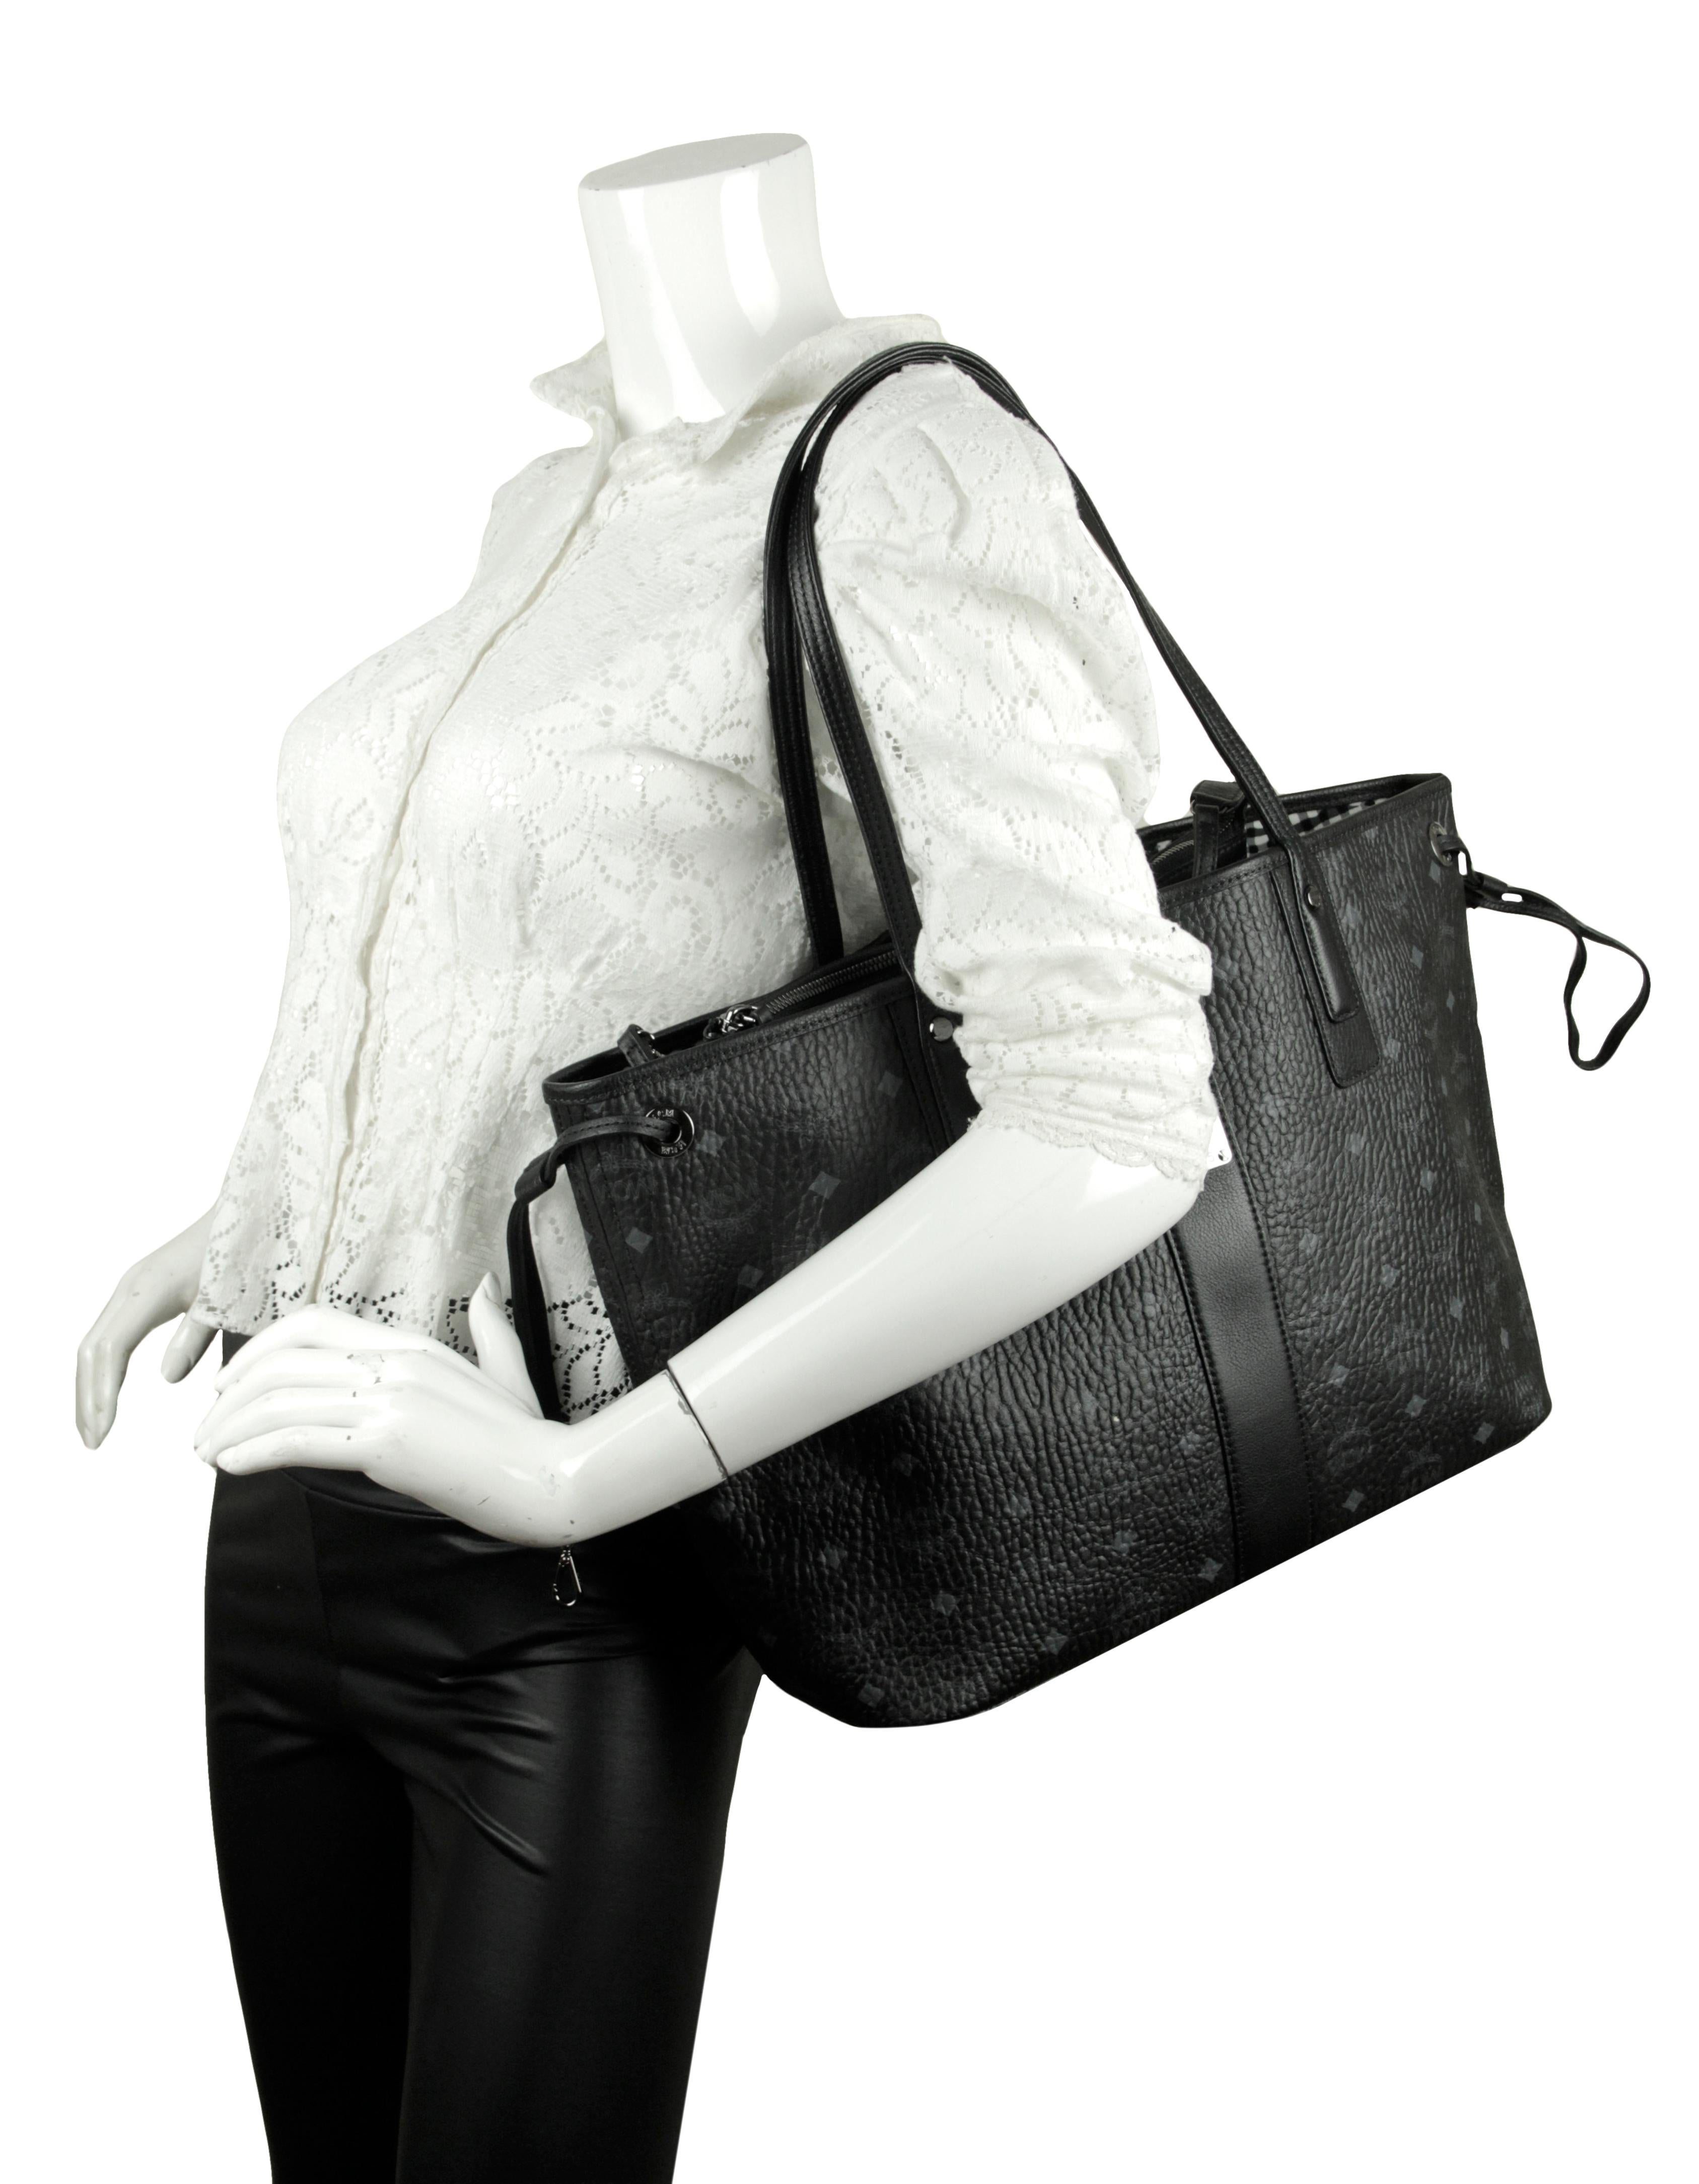 MCM Black Visetos Large Liz Reversible Shopper Tote Bag.  
Made In: Korea
Color: Black, white and grey
Hardware: Darkened silvertone
Materials: Coated canvas with leather handles and canvas reversible interior
Closure/Opening: Open top
Exterior